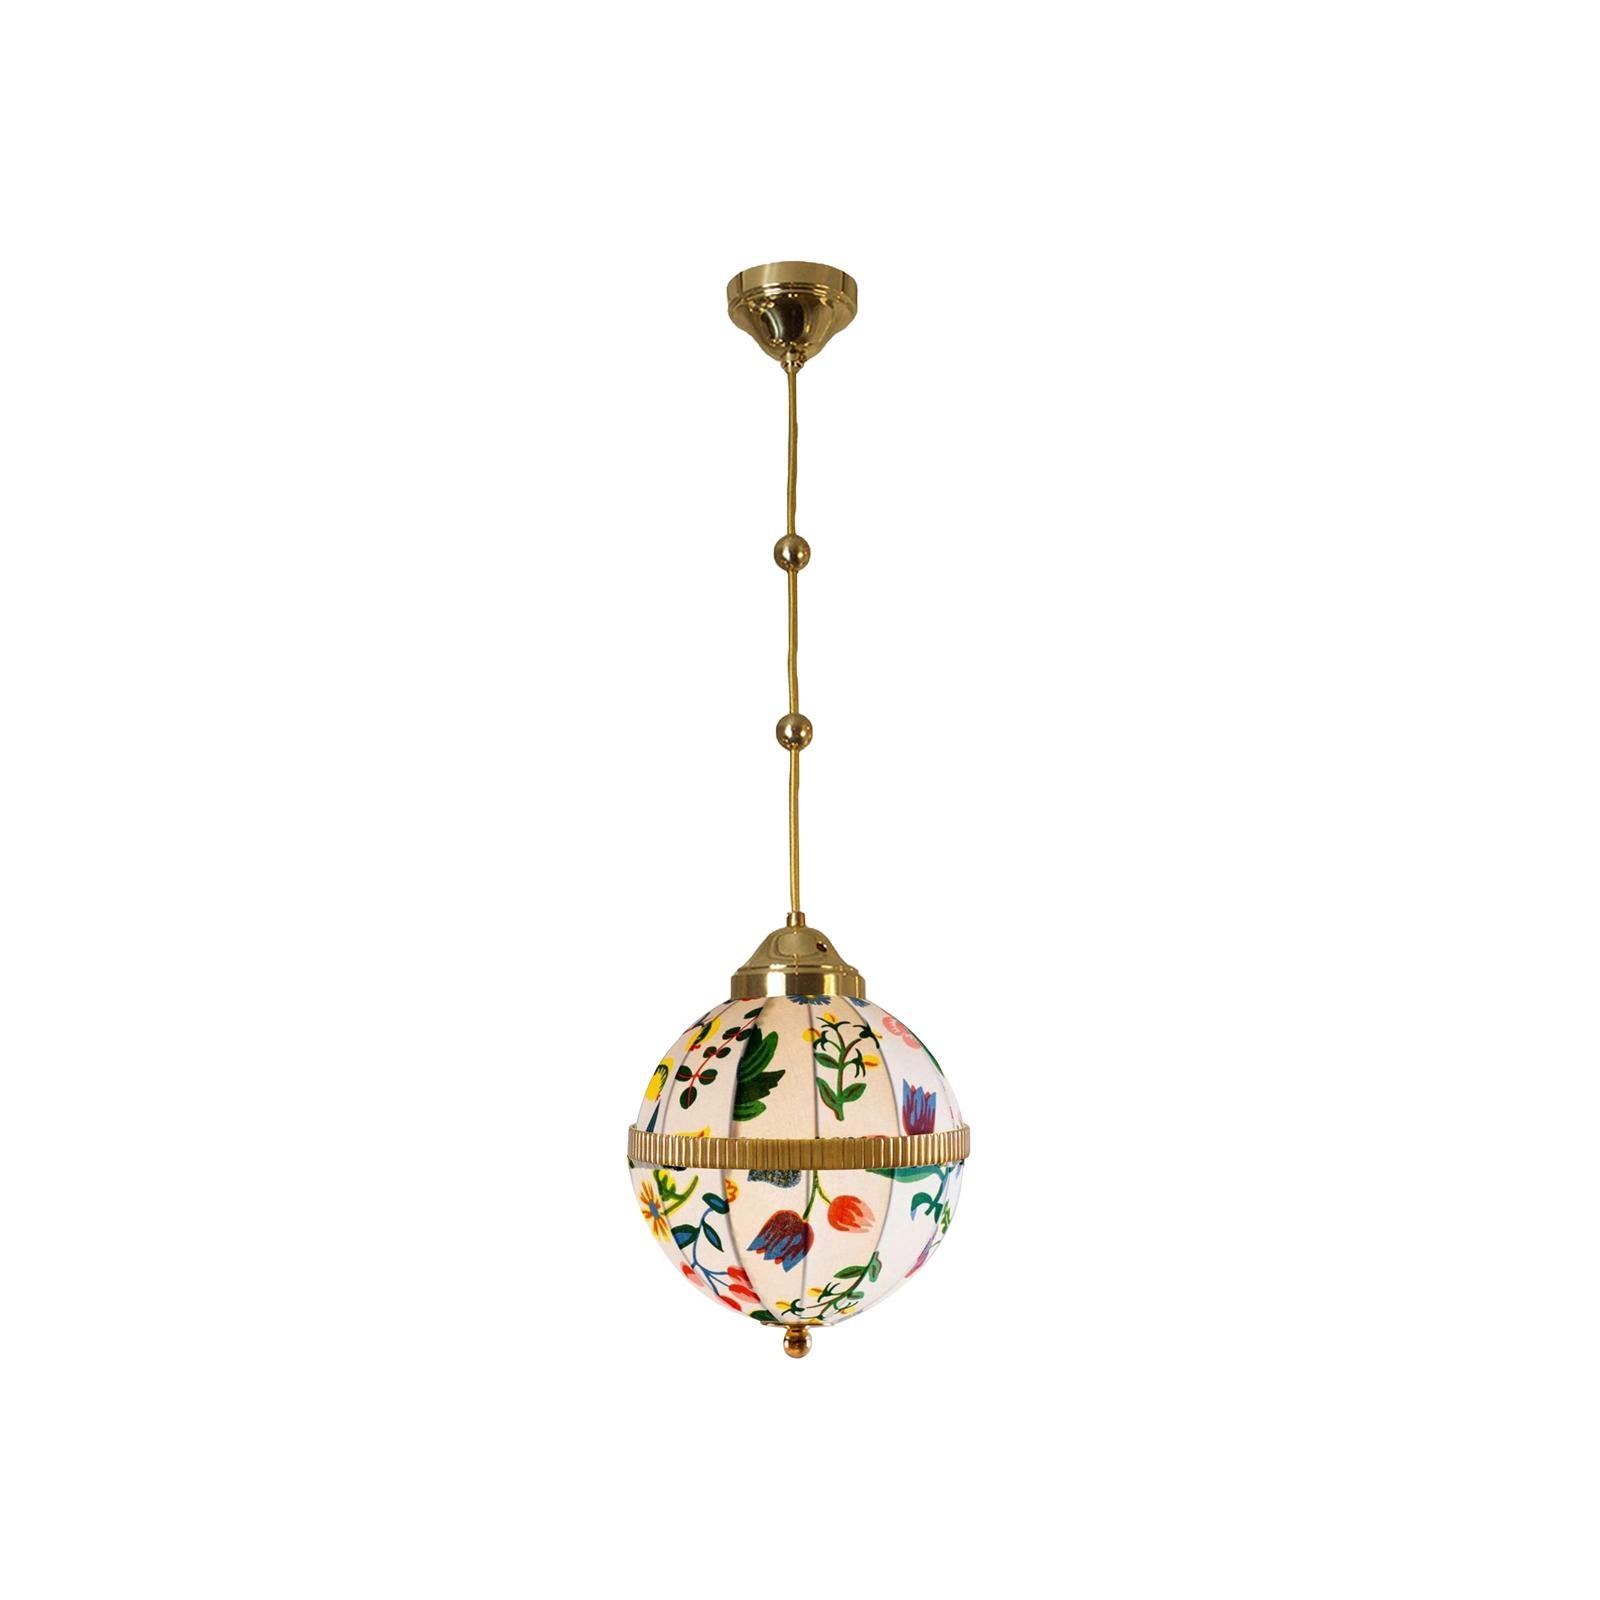 Handsewn fabric shade, pattern by Josef Frank for Svenskt Tenn, hanging on a fabric-covered wire, brass-parts in the requested finish

Height is customisable